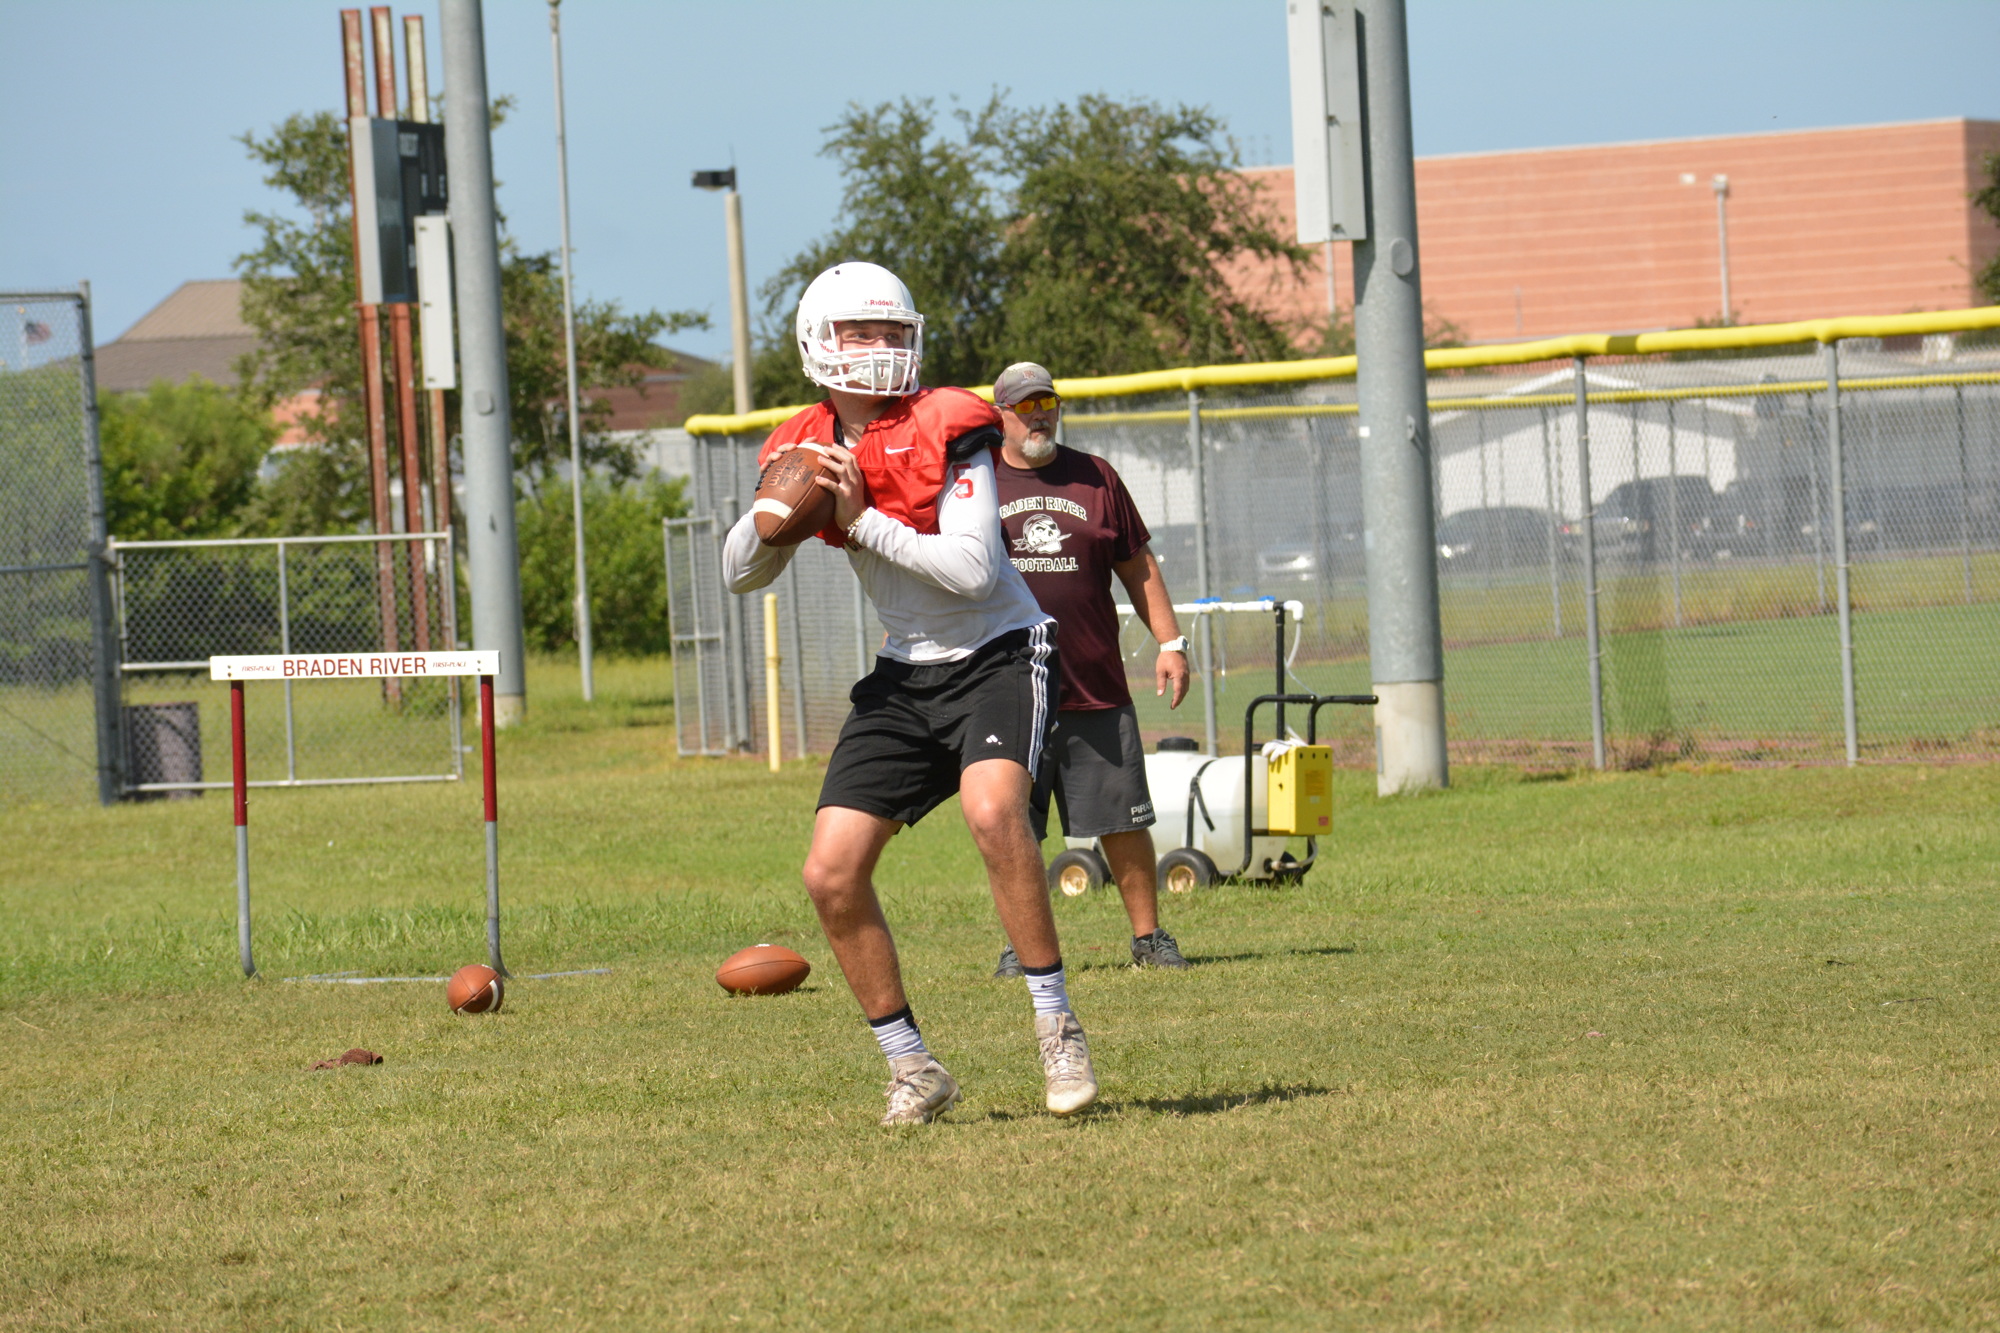 Braden River quarterback Bryan Gagg looks to launch a pass during practice.